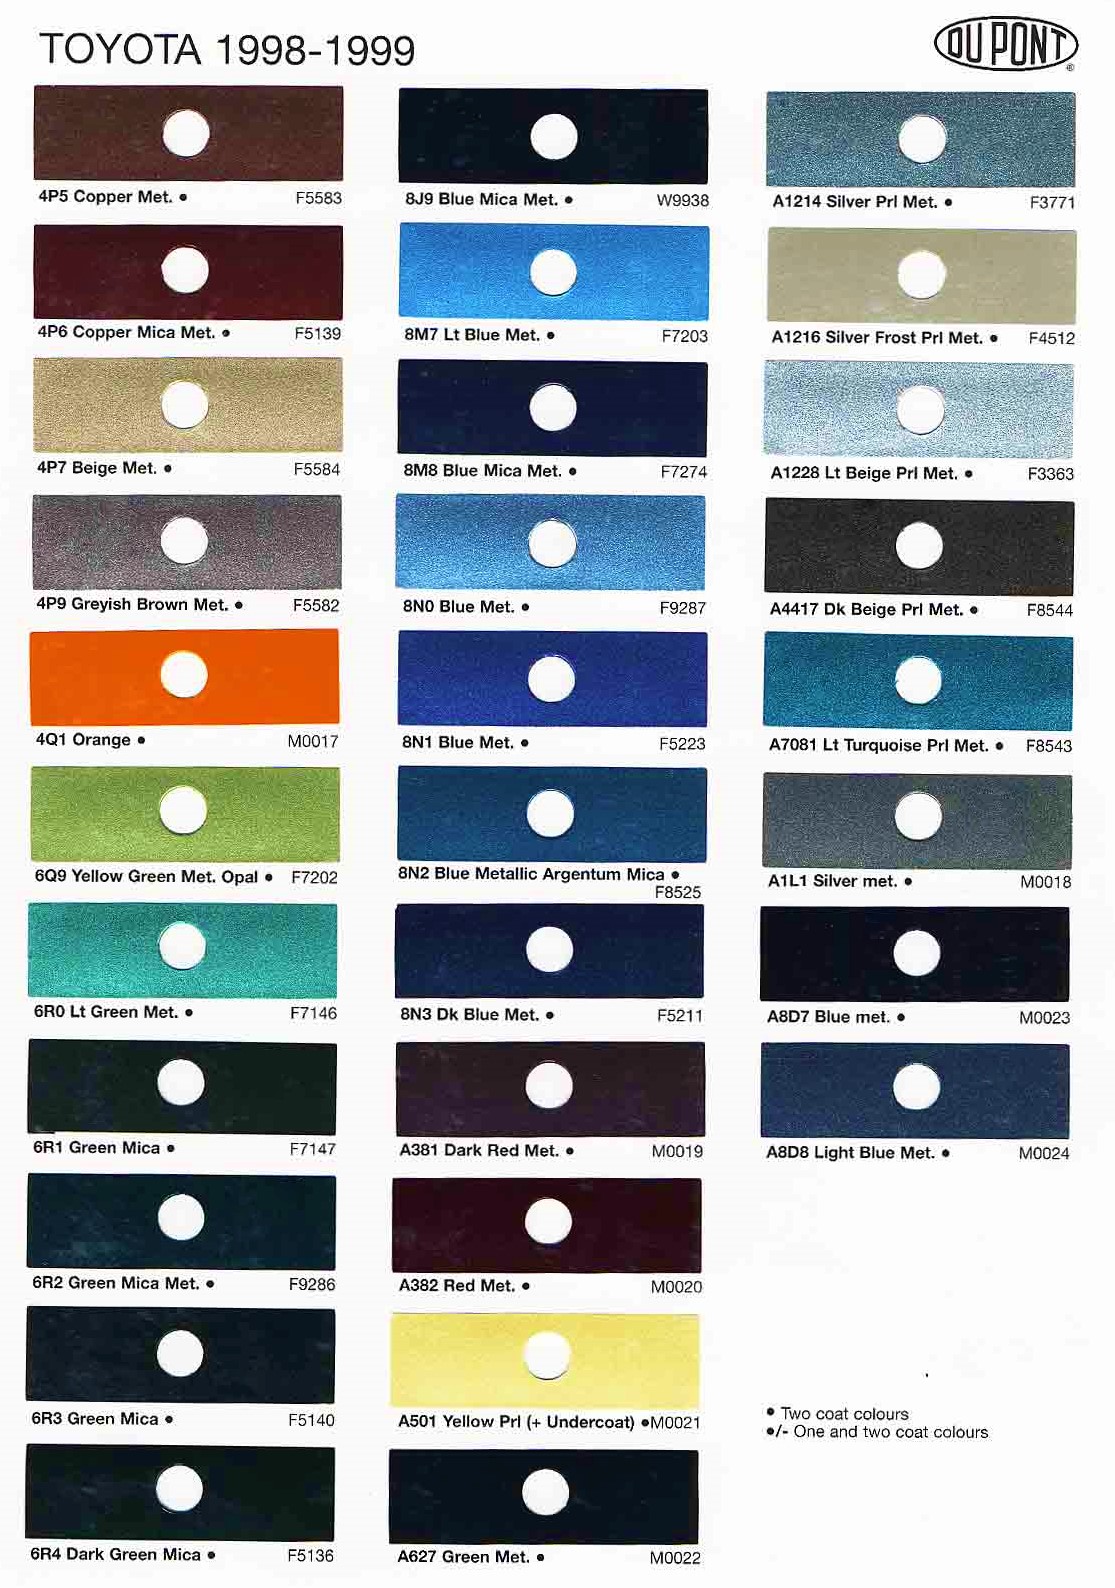 exterior colors of Toyota vehicles and their ordering codes